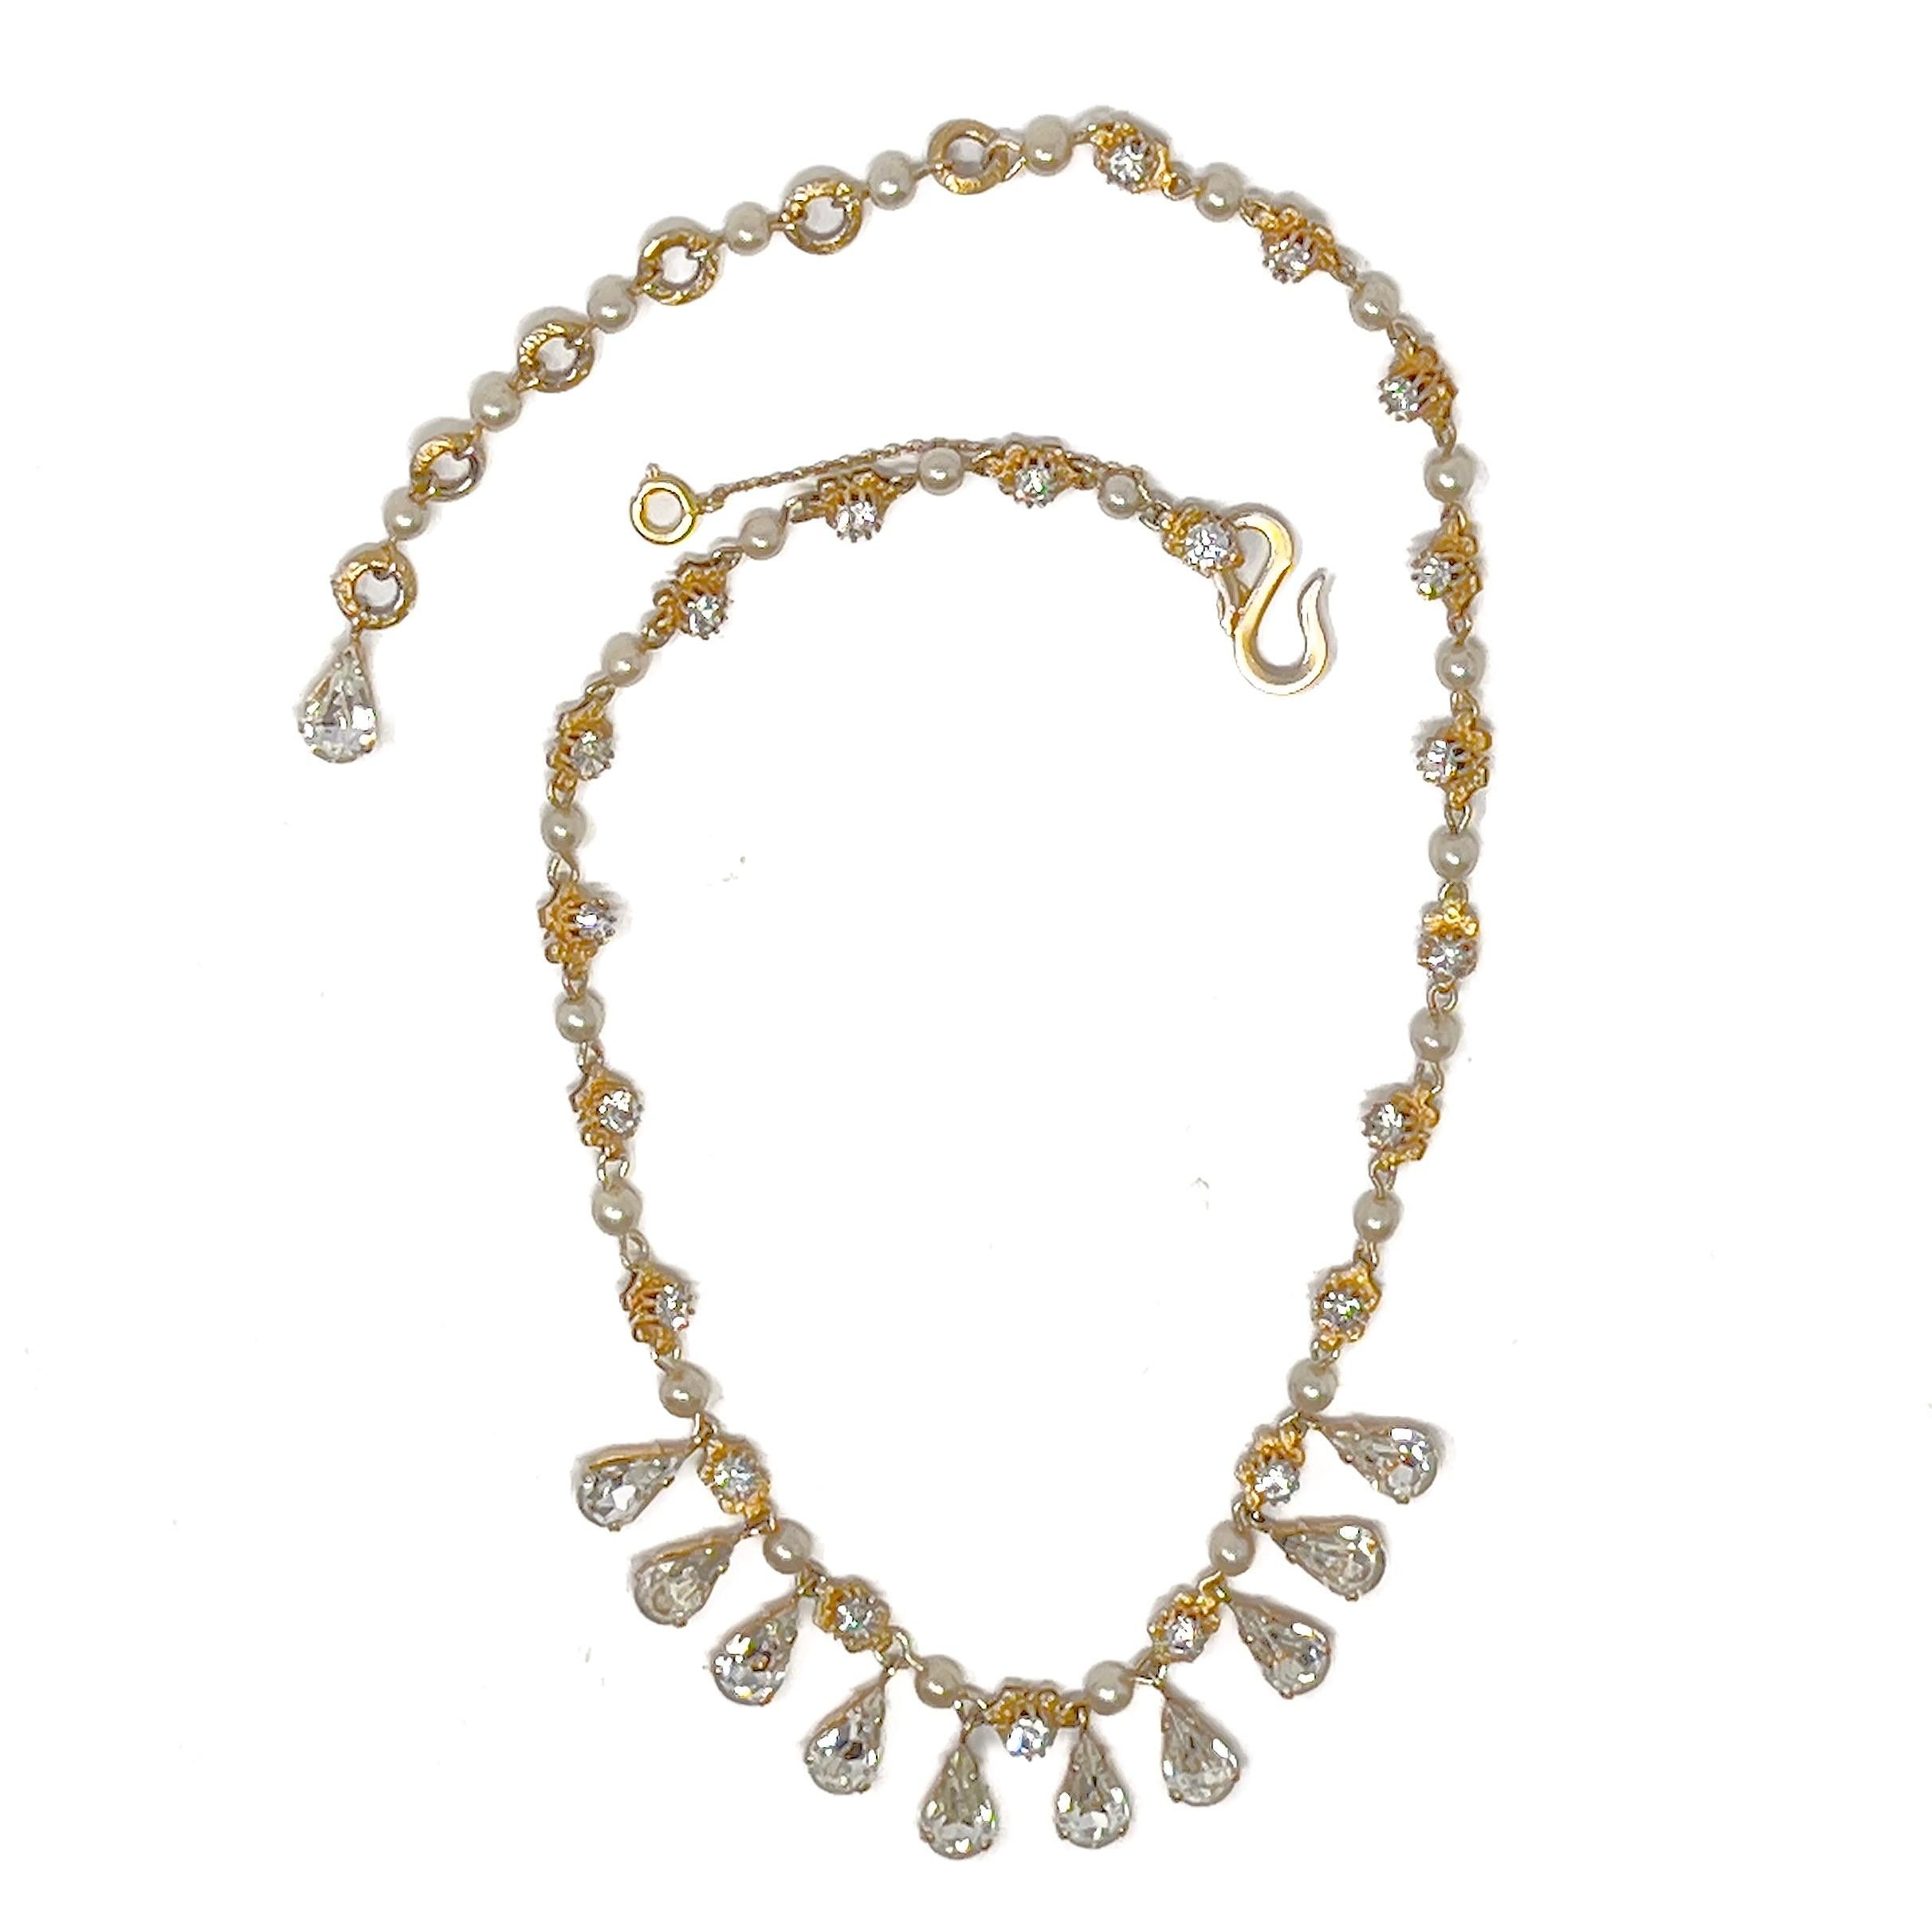 Christian Dior by Mitchel Maer 1952-1956 Vintage Rhinestone and Pearl Necklace For Sale 4